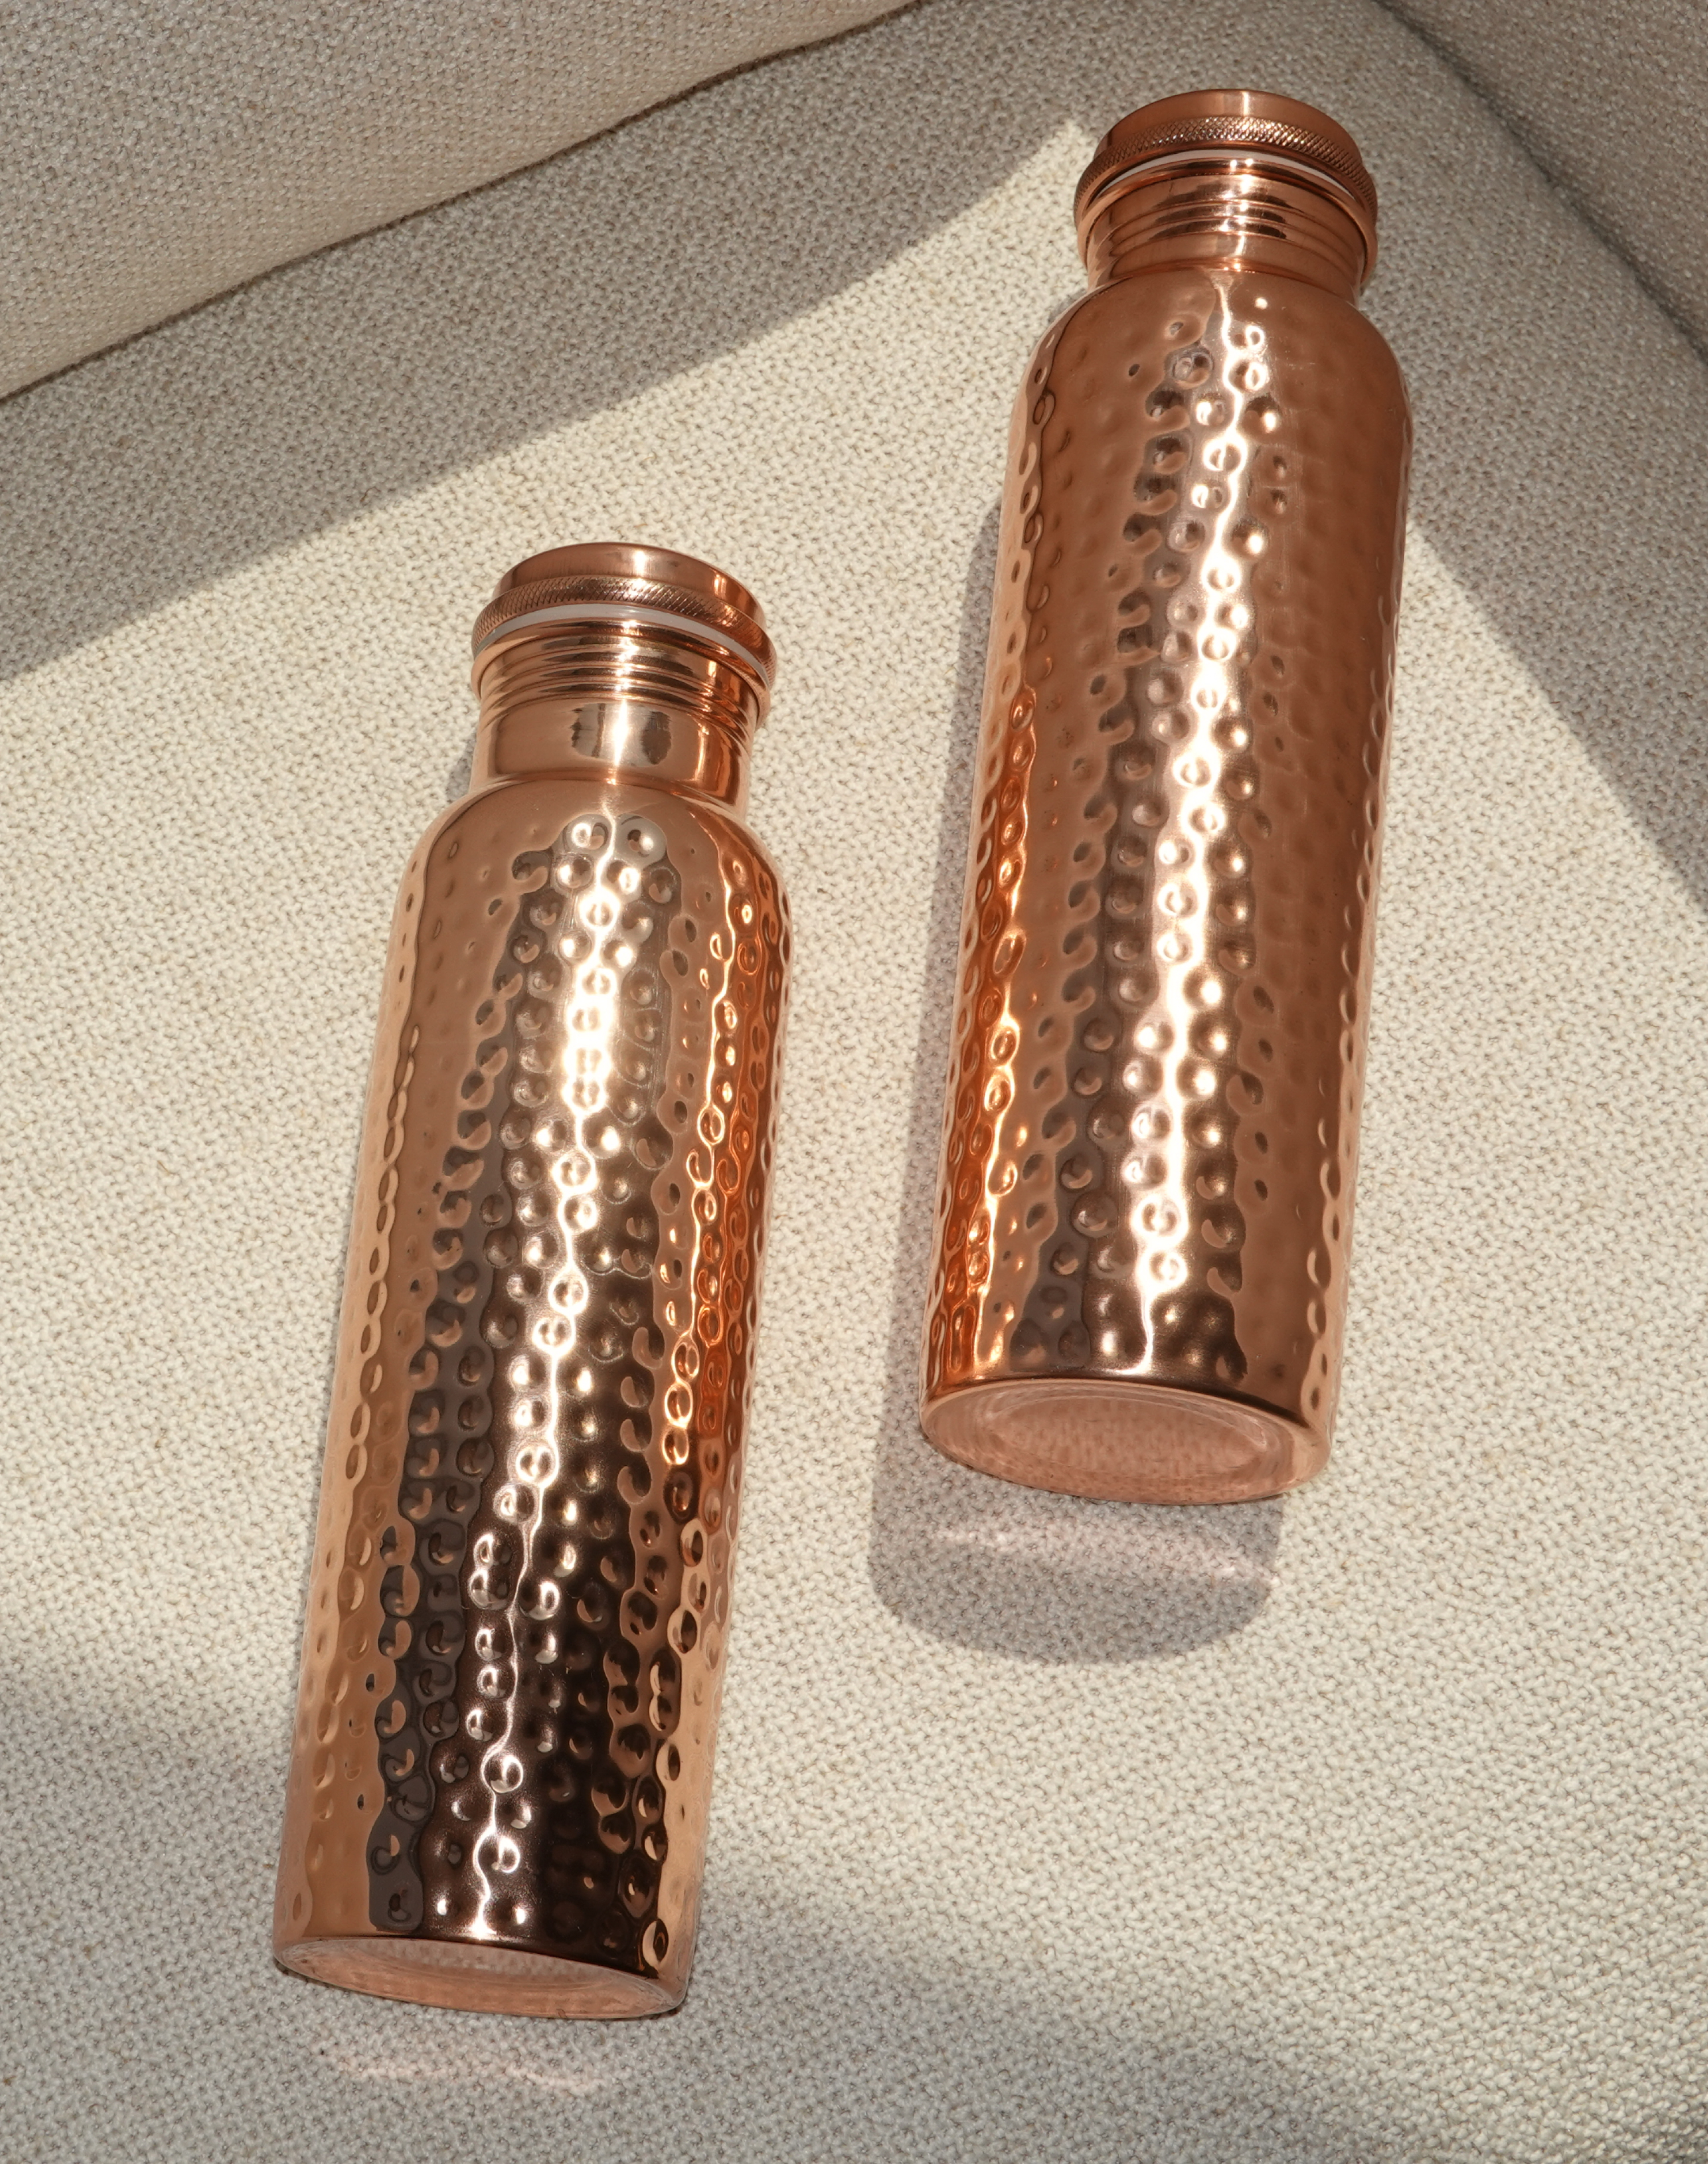 Discover 10 Extraordinary Benefits of Drinking From A Copper Water Bottle